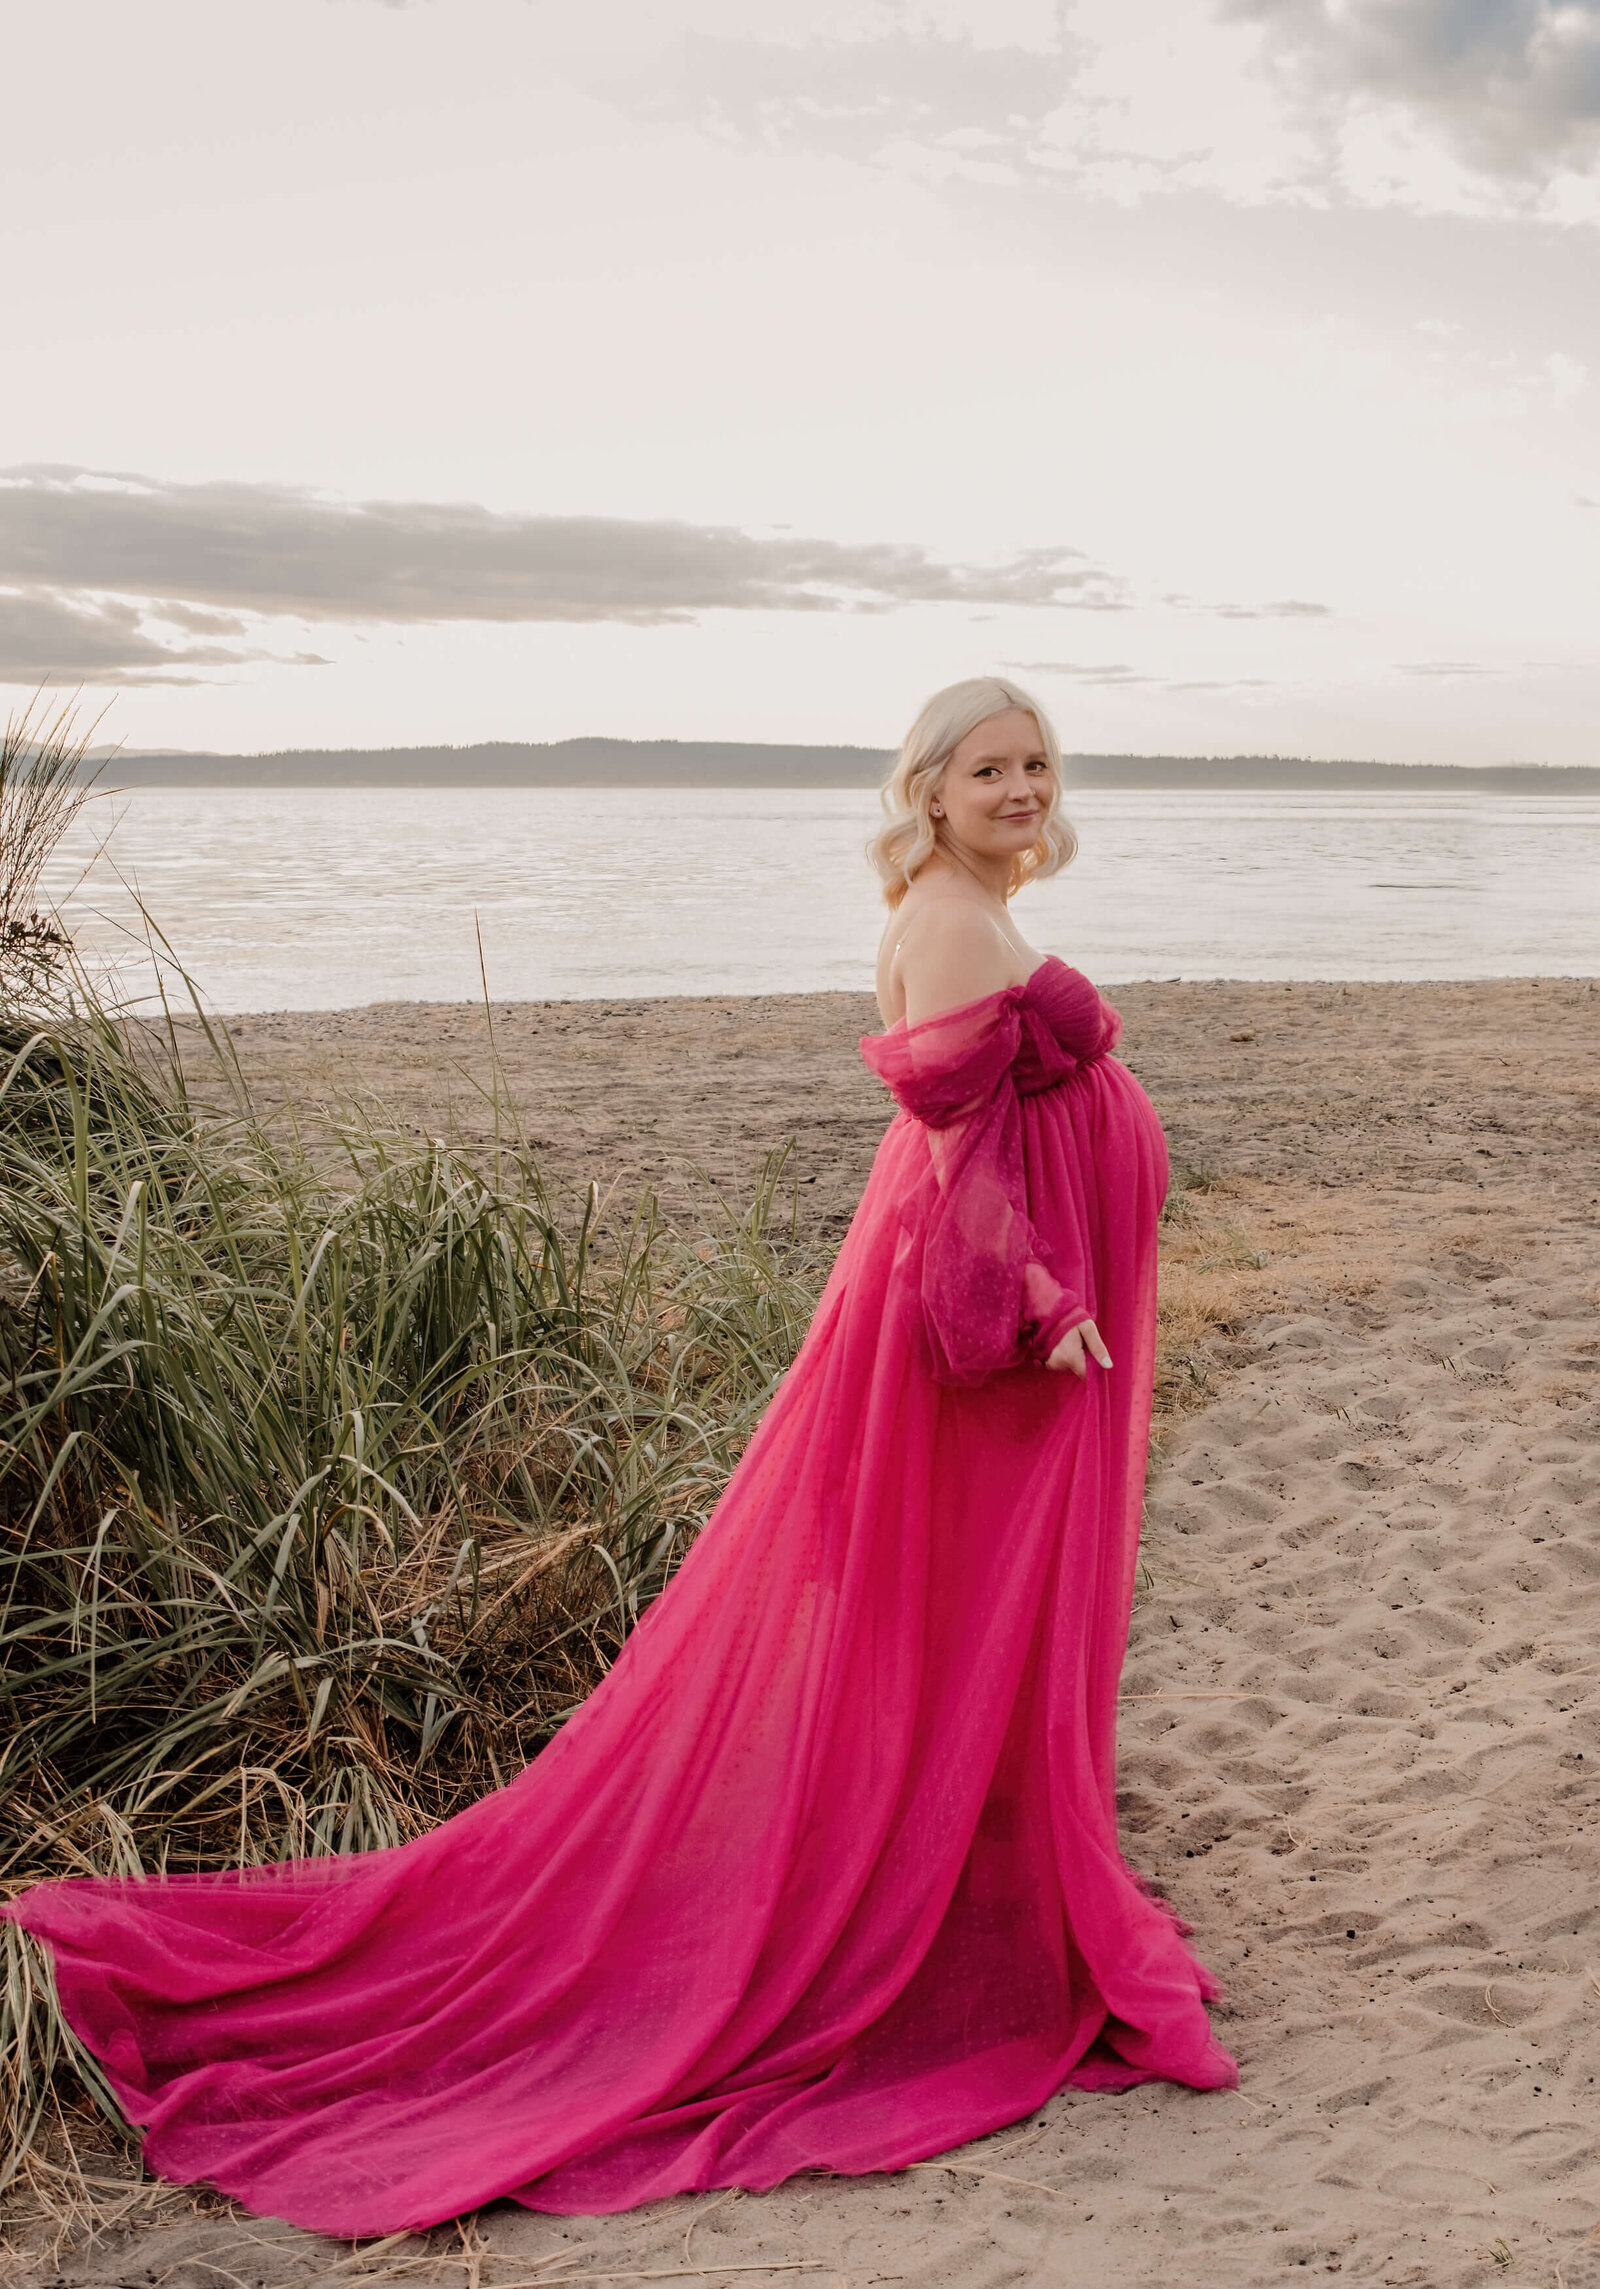 Pregnant woman in pink dress standing on beach.